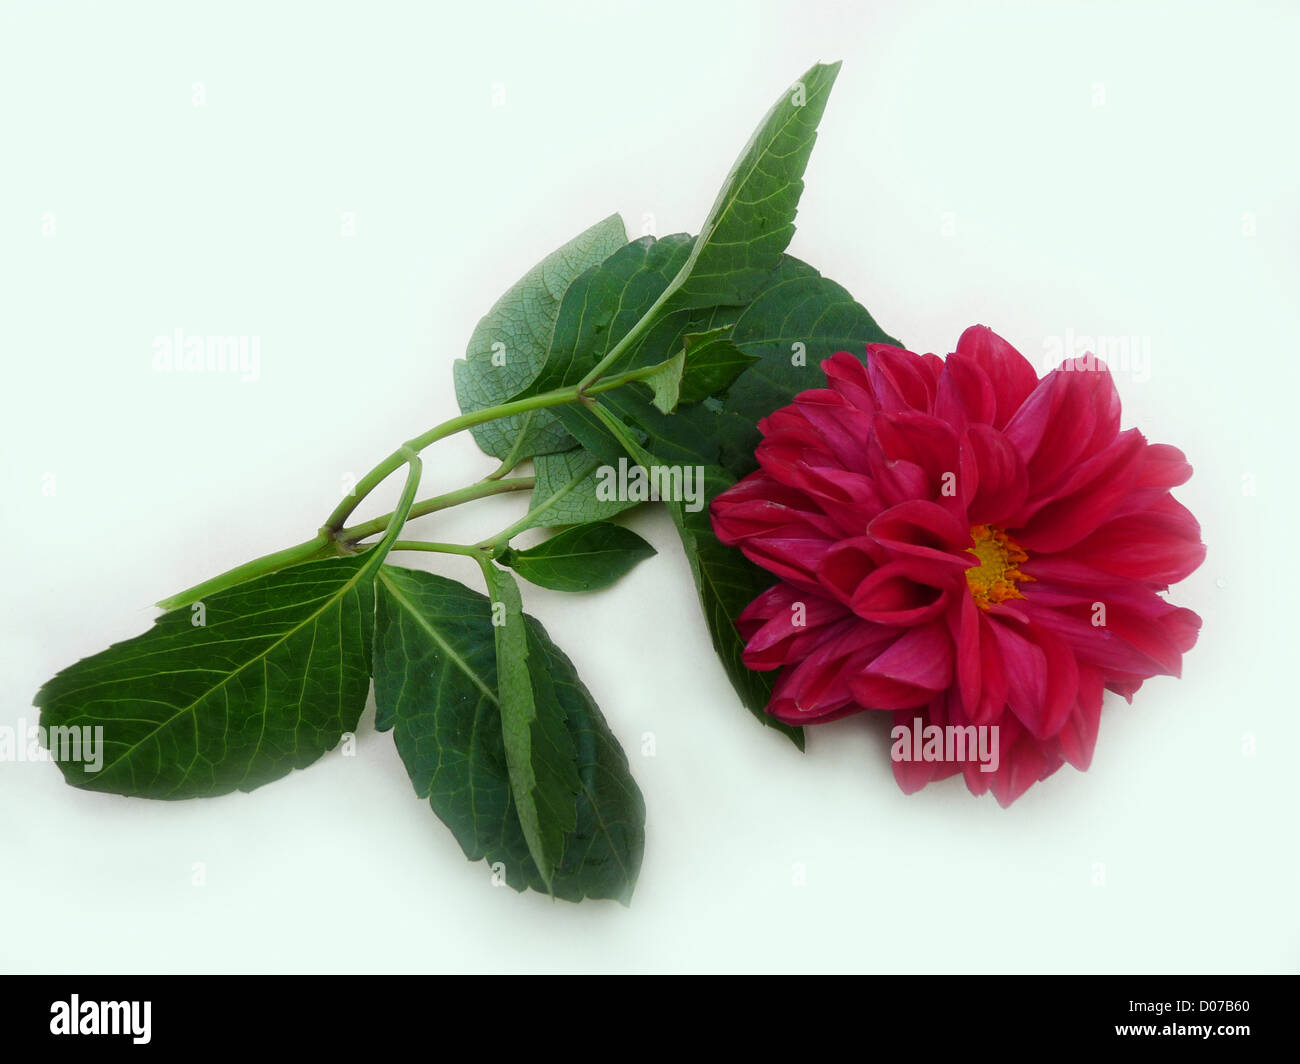 flower; dahlia; one magenta; red; green; leaves; autumn; plants; flora; composition; gift; greeting; isolated; light background; Stock Photo